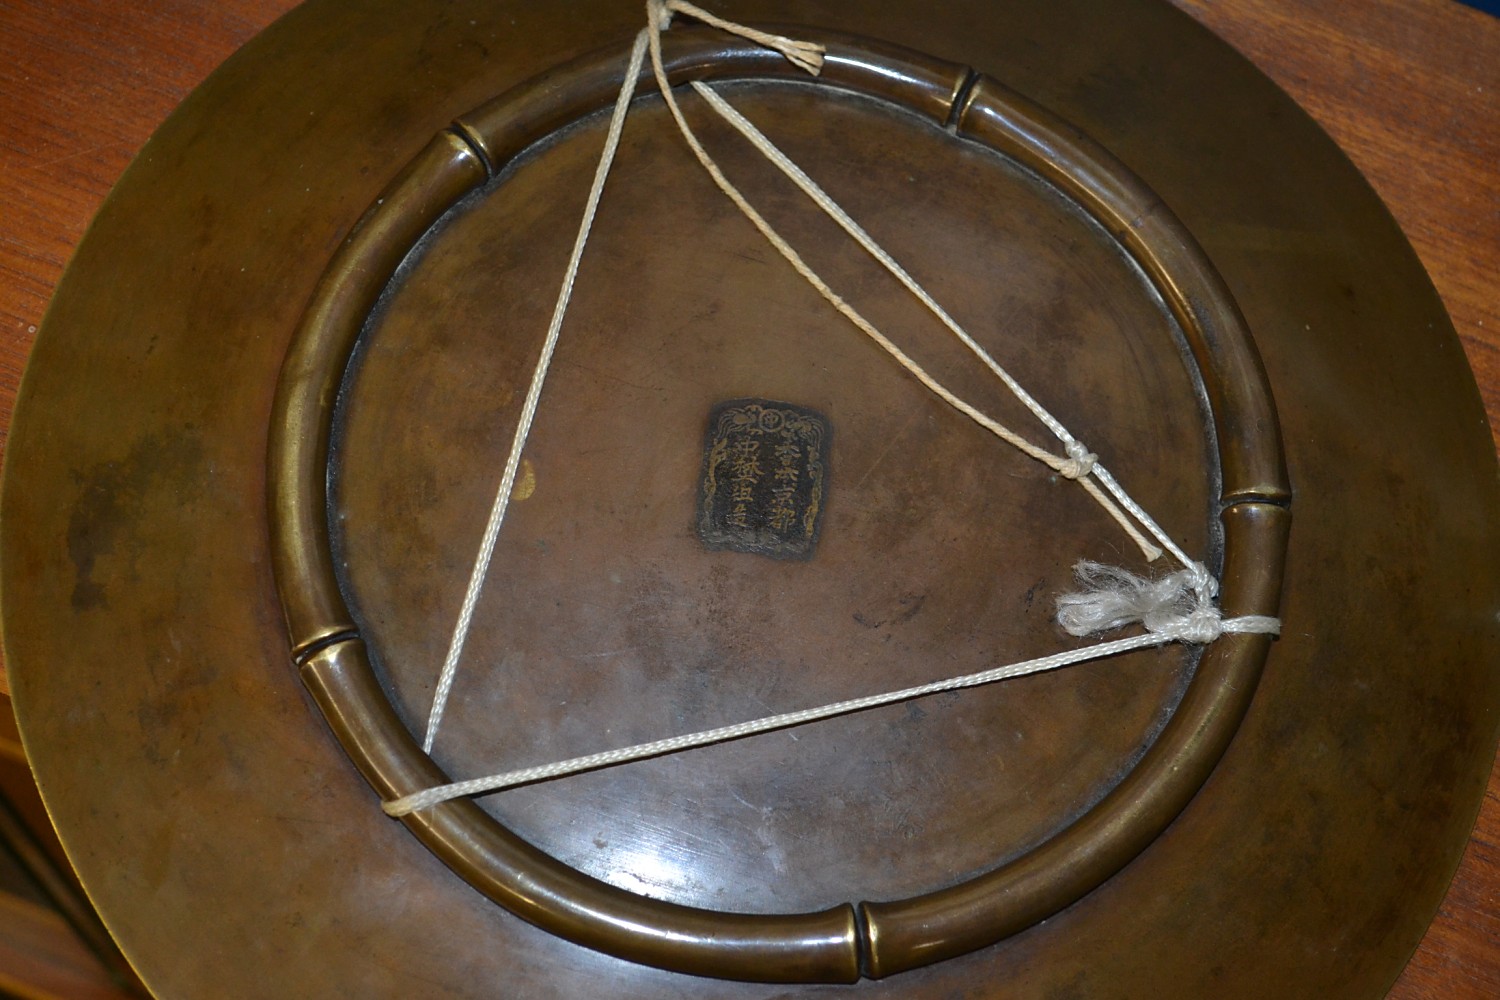 Japanese Meiji period decorative charger, seal marks to base, diameter 31cm - Image 7 of 7